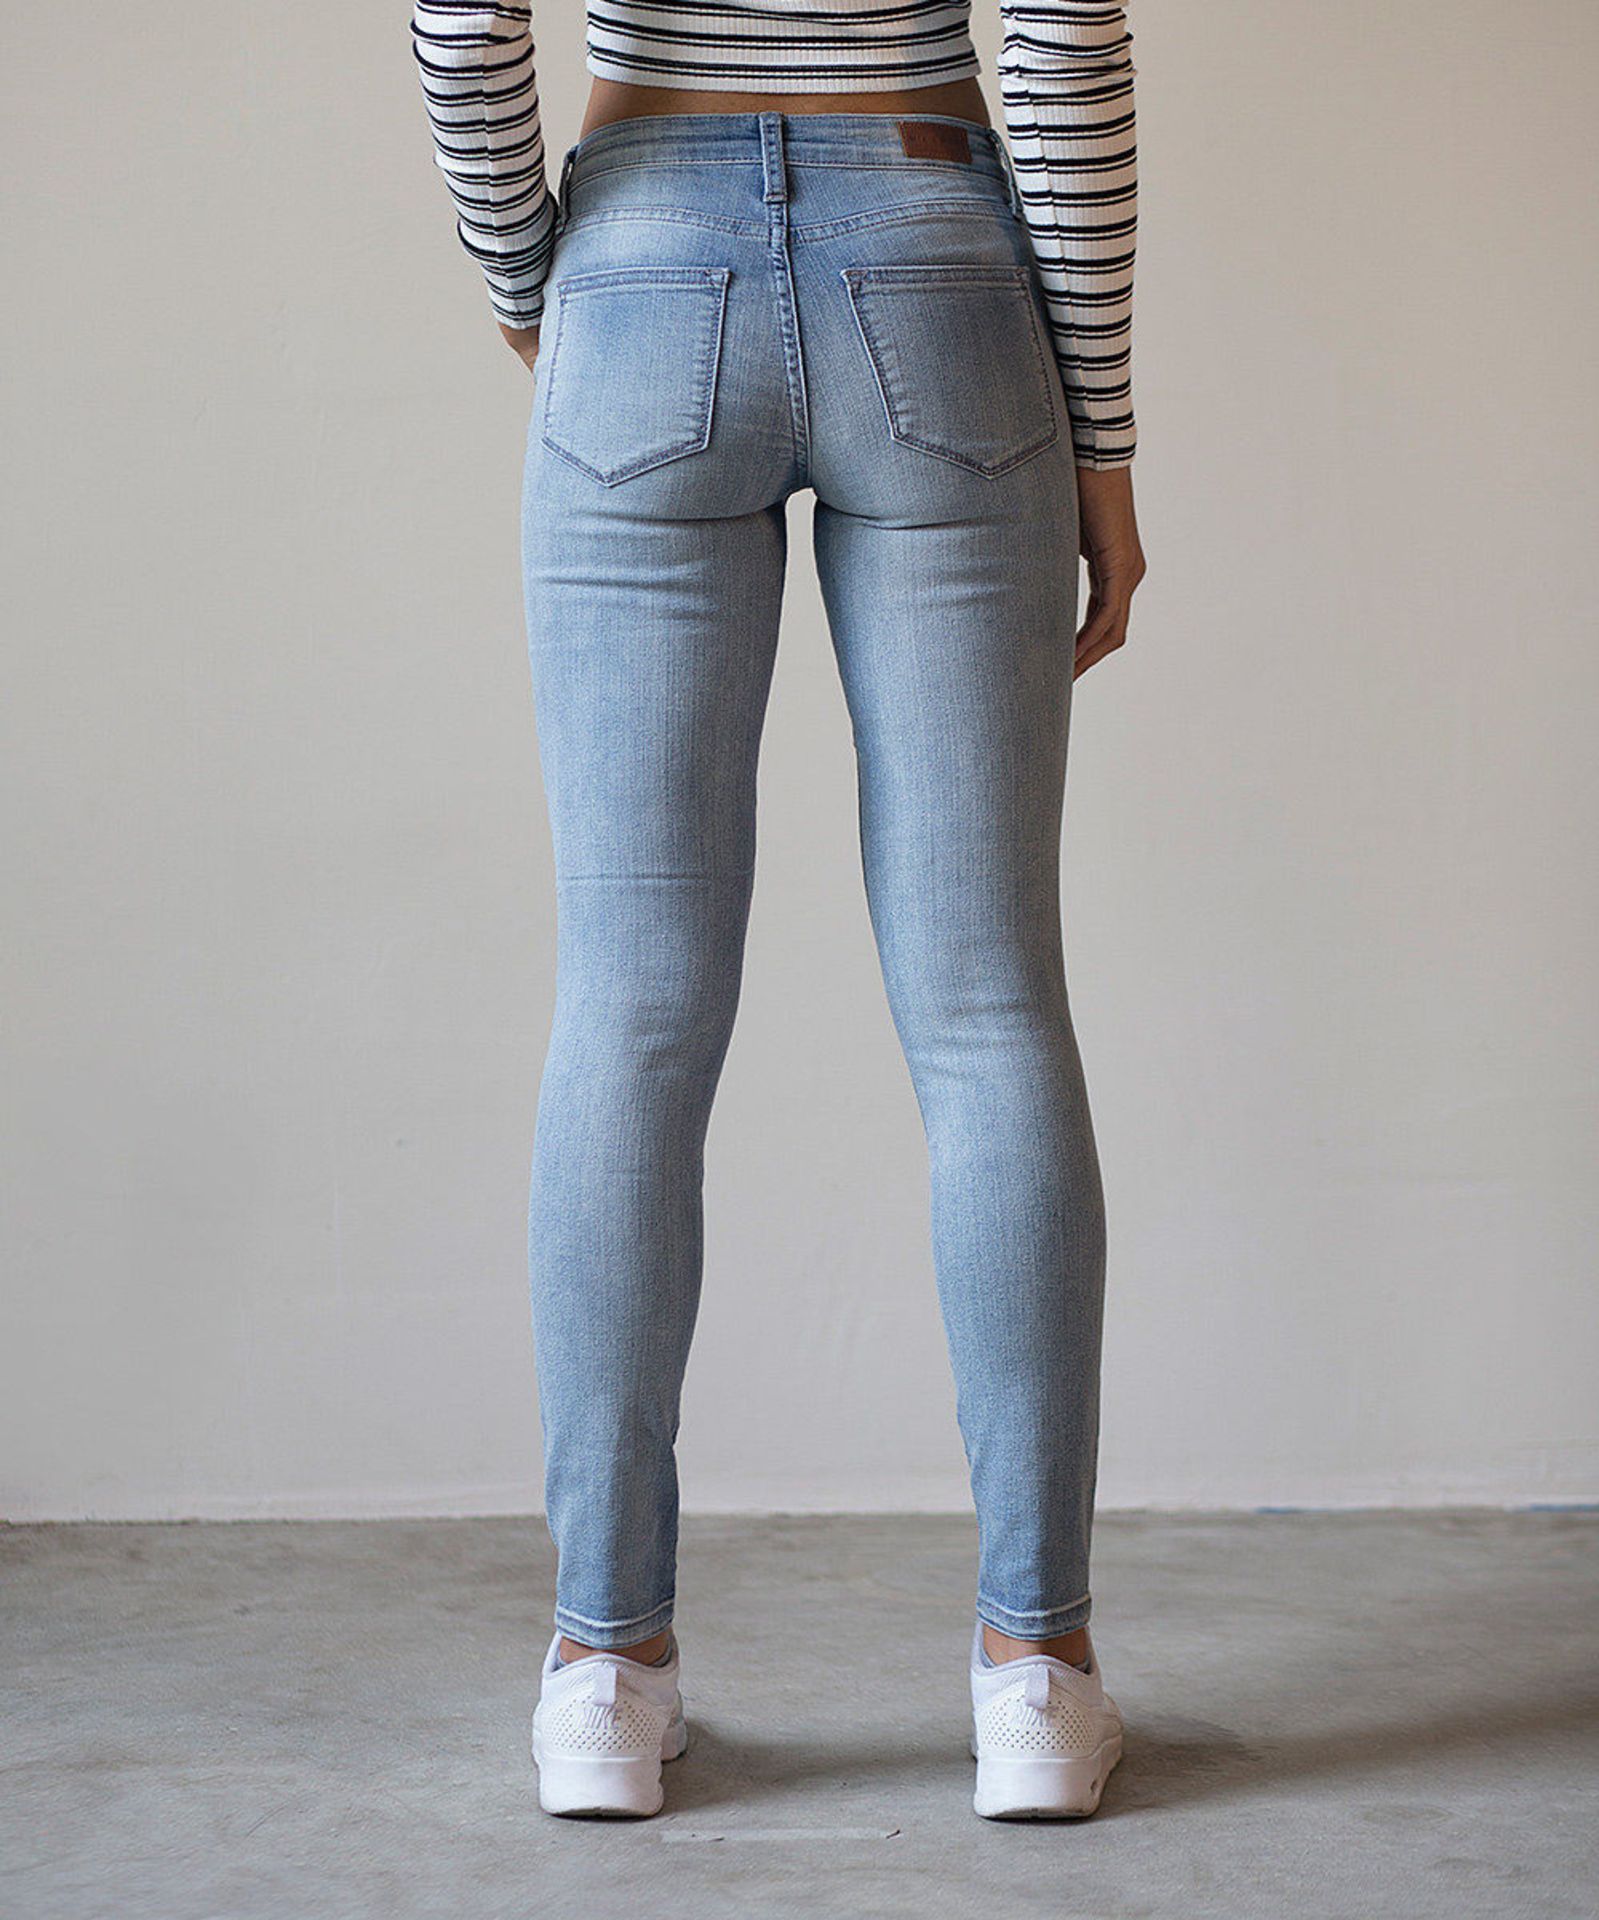 MIA & MOSS, Light Blue Sabine Skinny Jeans, 30" (New with tags) [Ref: 47164611- T-56]